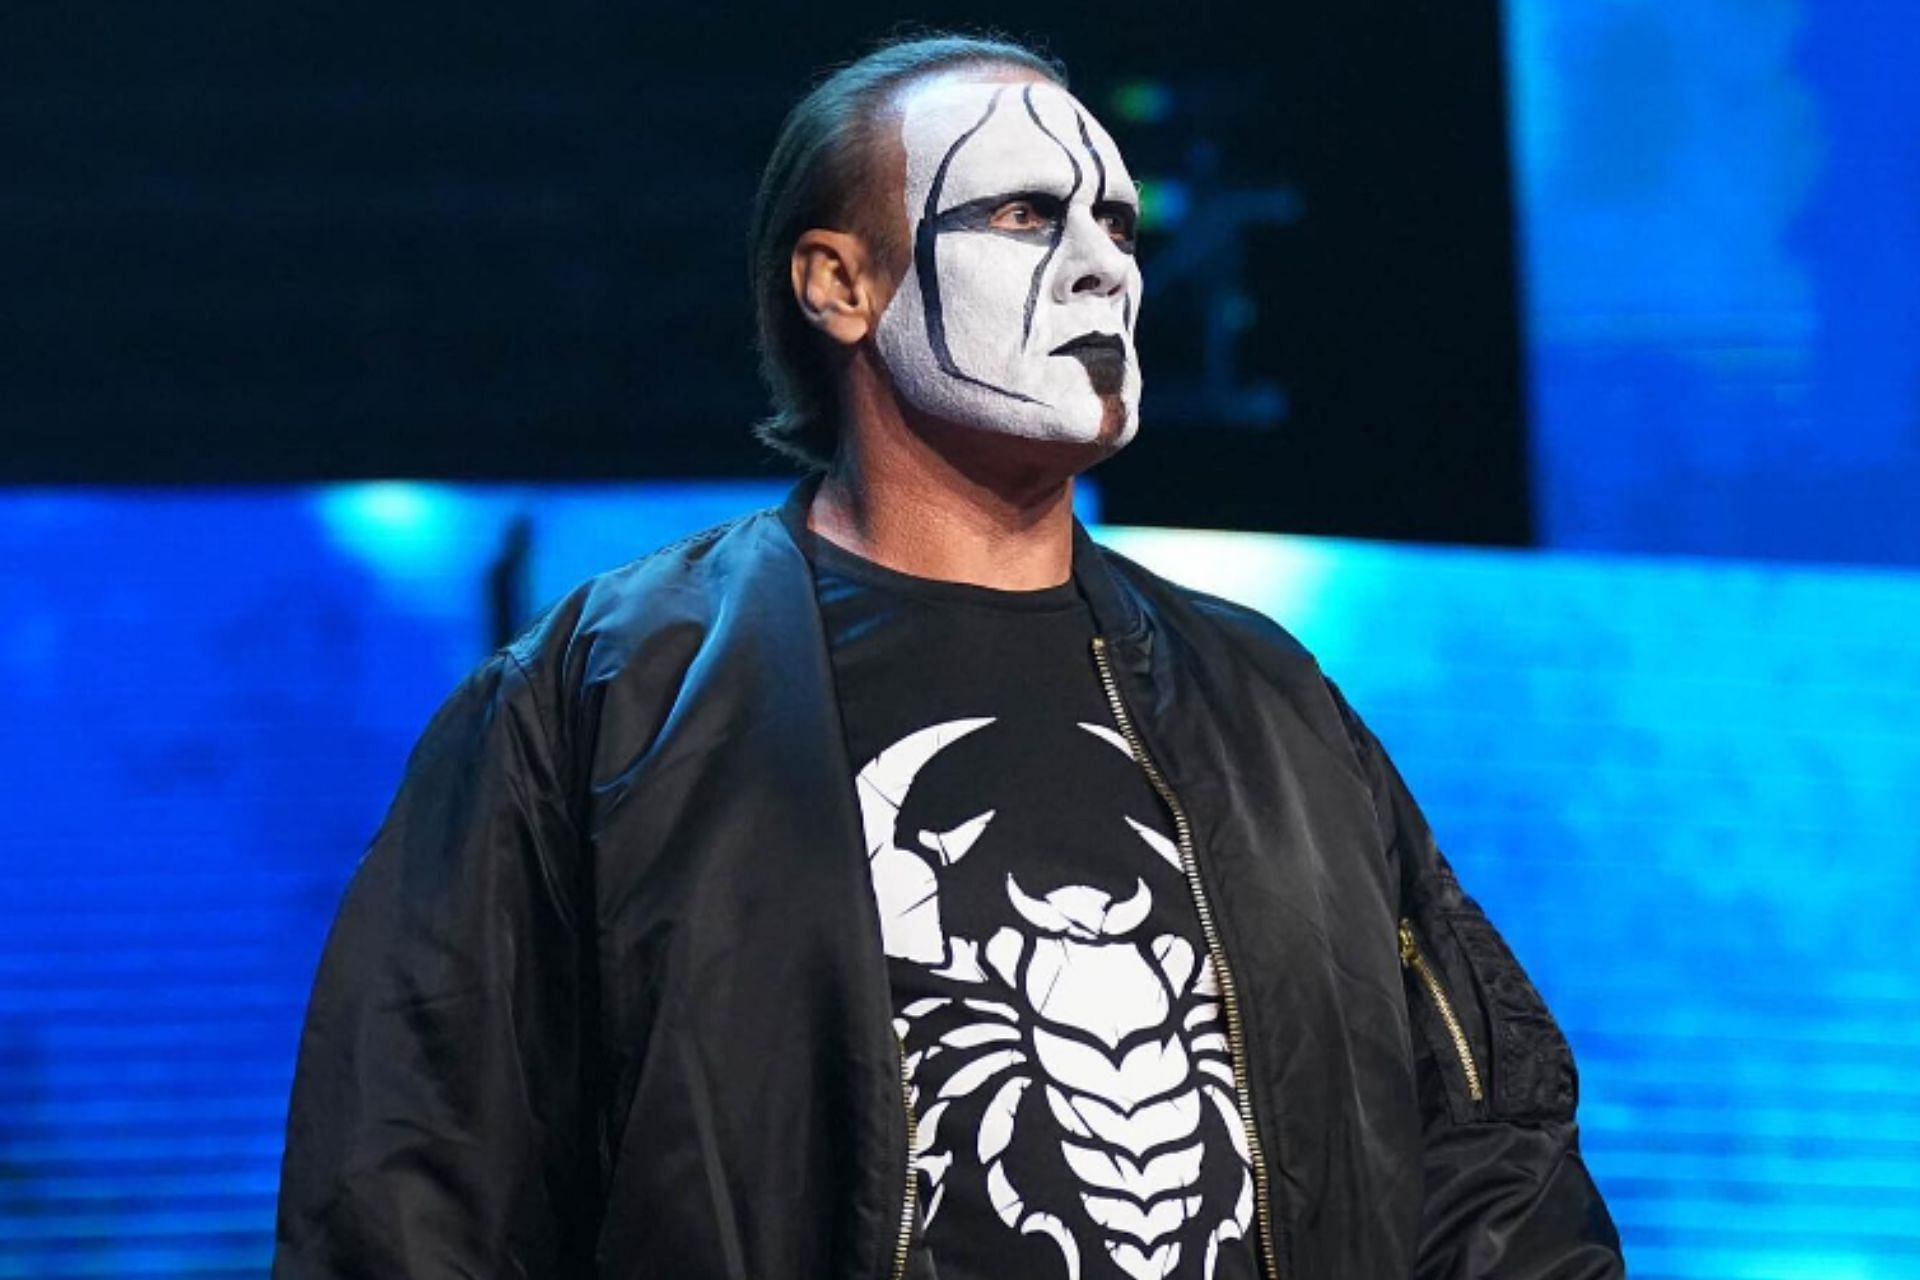 Sting addresses his fans aftern his AEW exit via social [Image Credit: Sting Instagram]